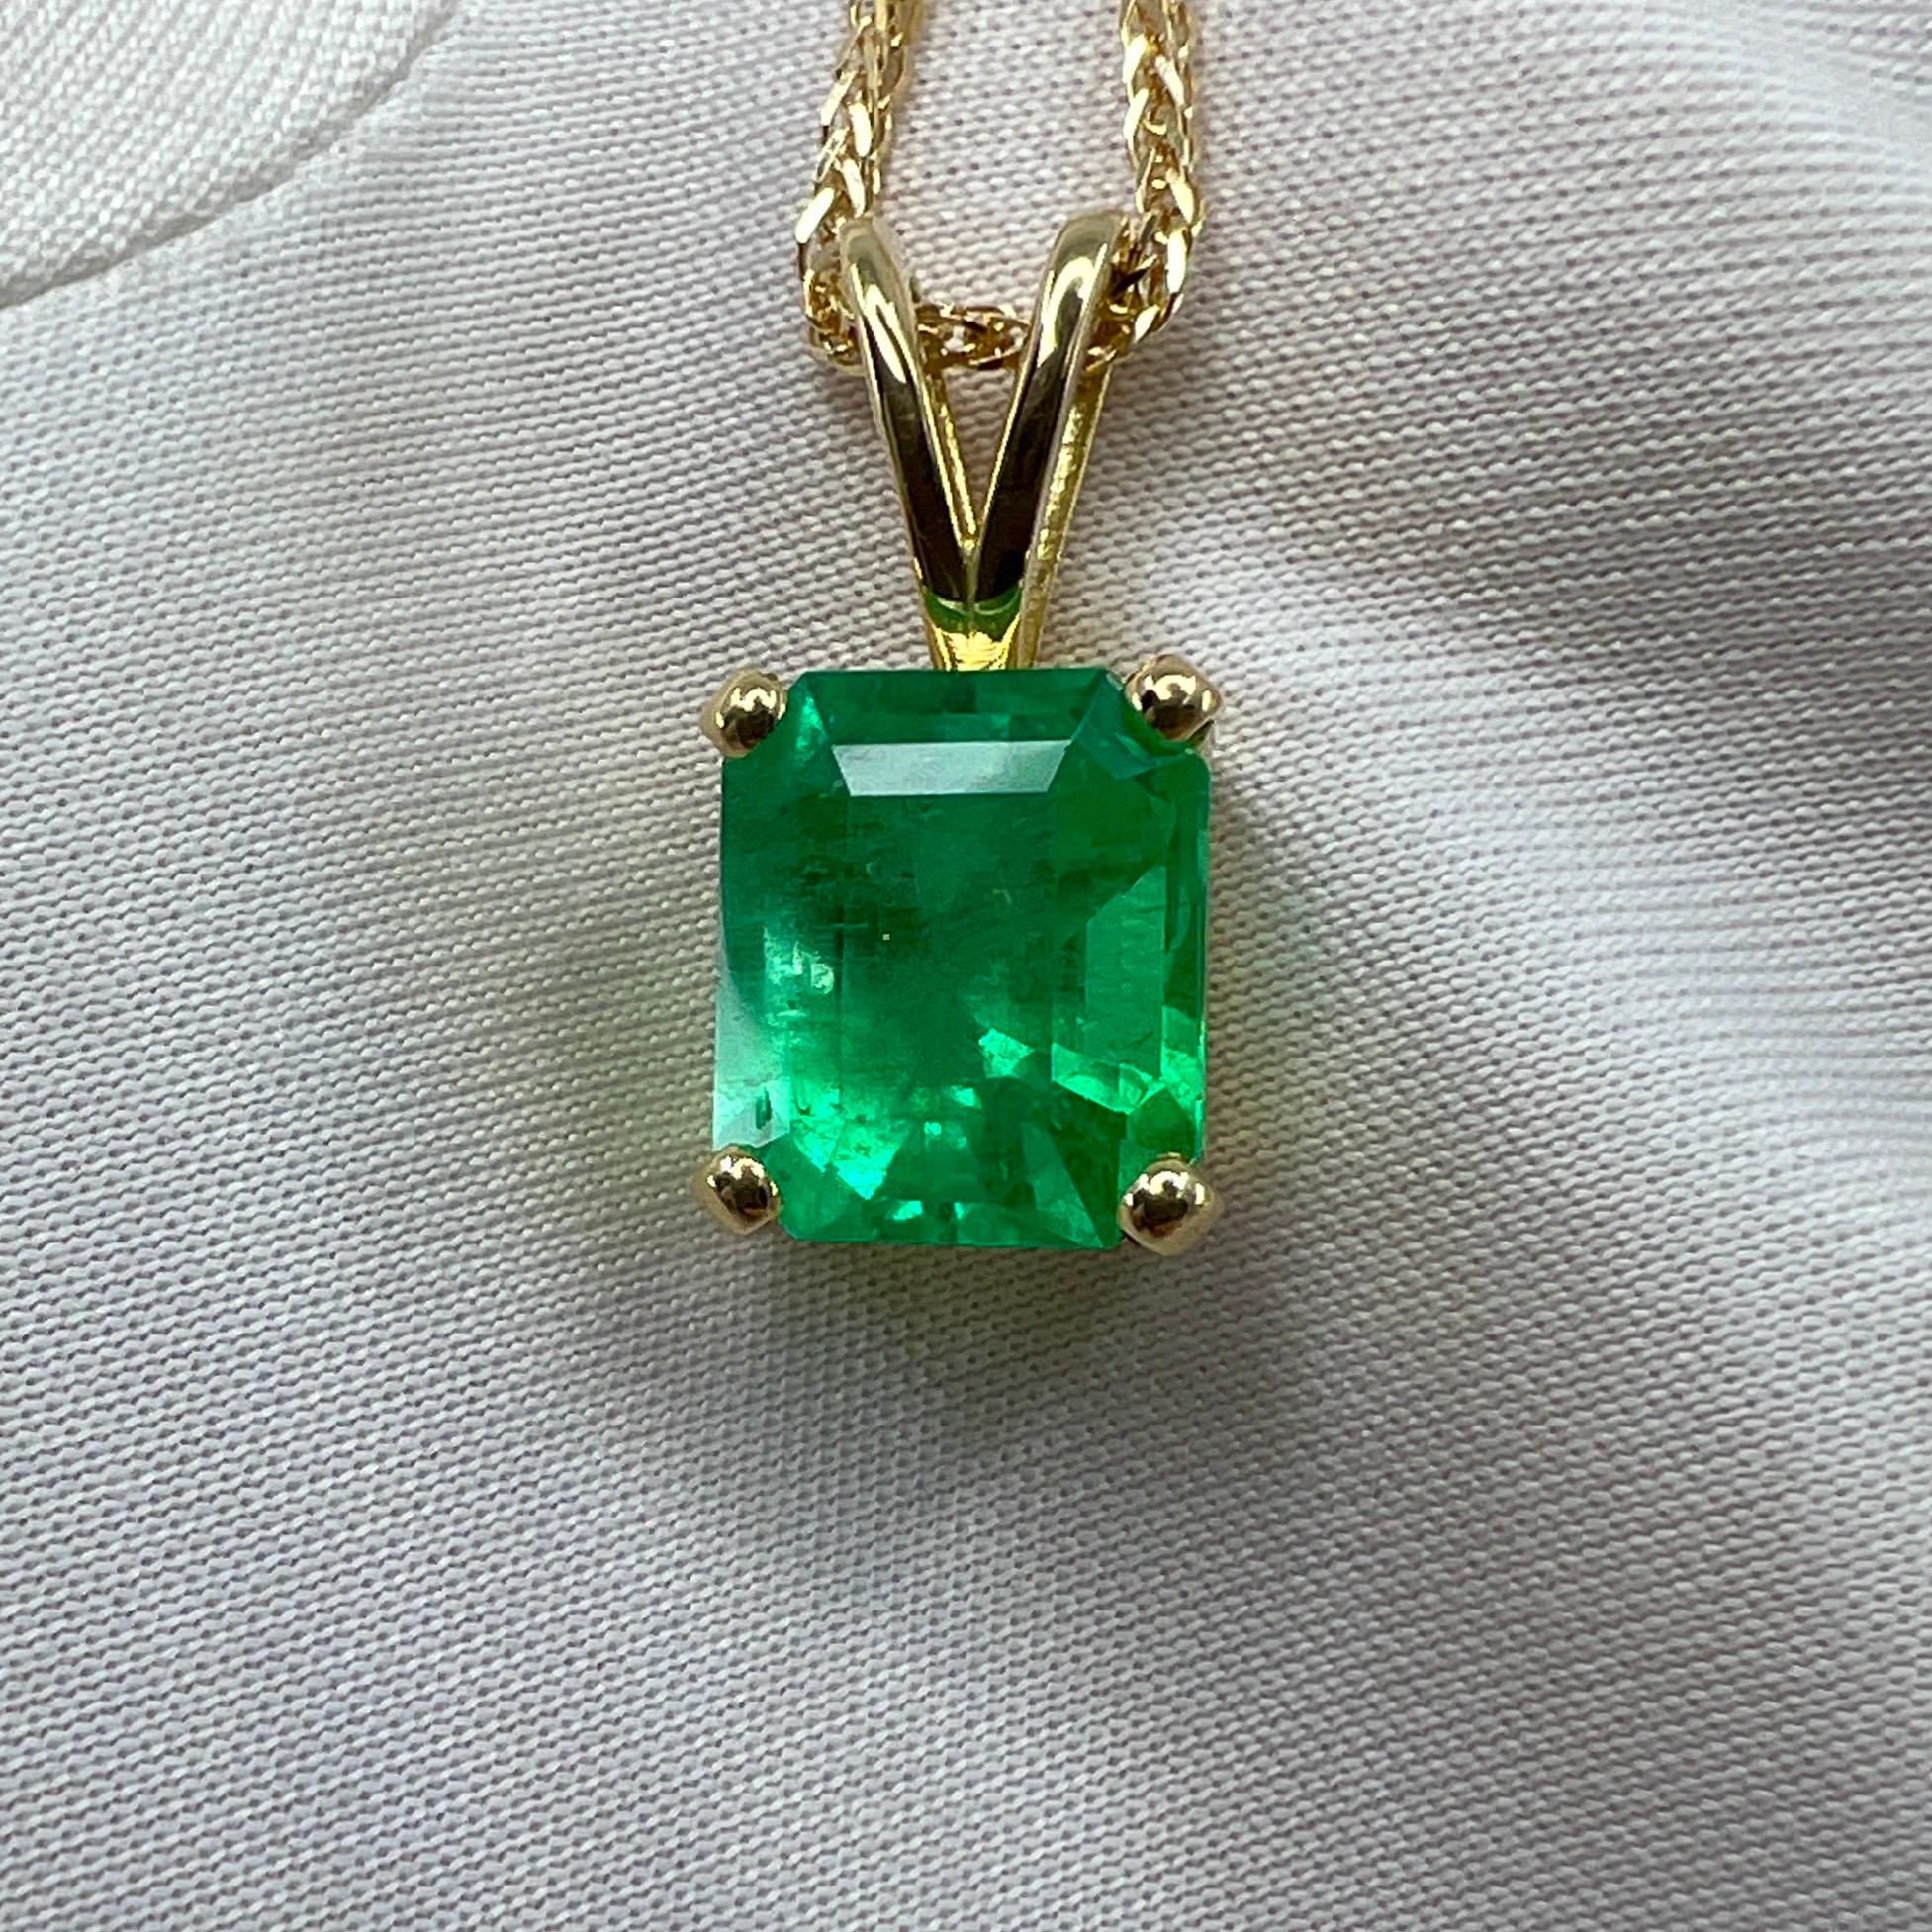 GIA Certified 3.32ct Vivid Green Colombian Emerald 18k Gold Pendant Necklace 4